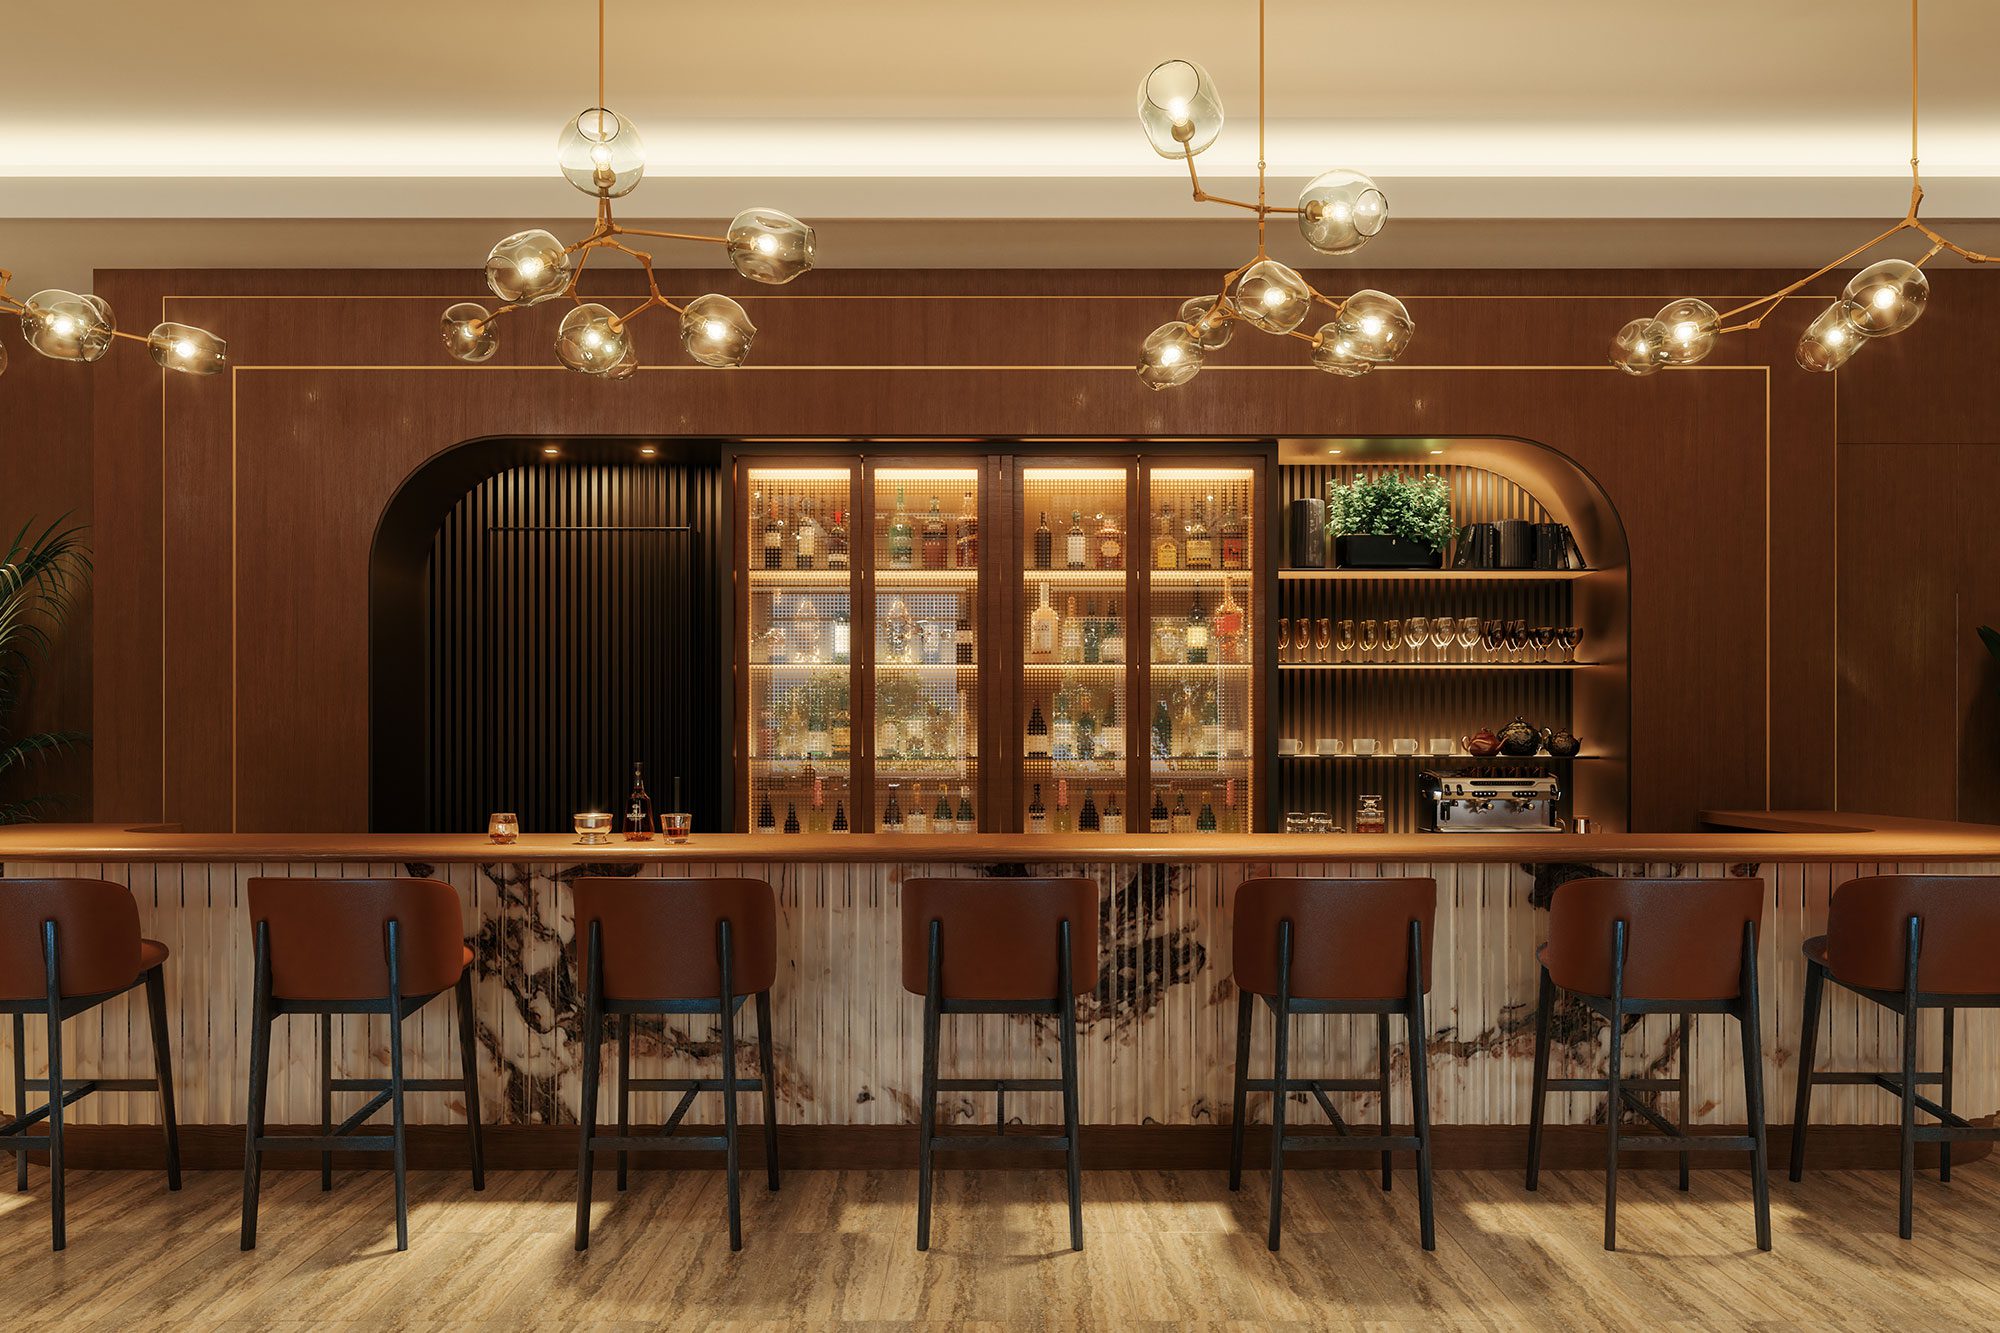 A luxury mid-century chic bar with classy art-deco wood paneling